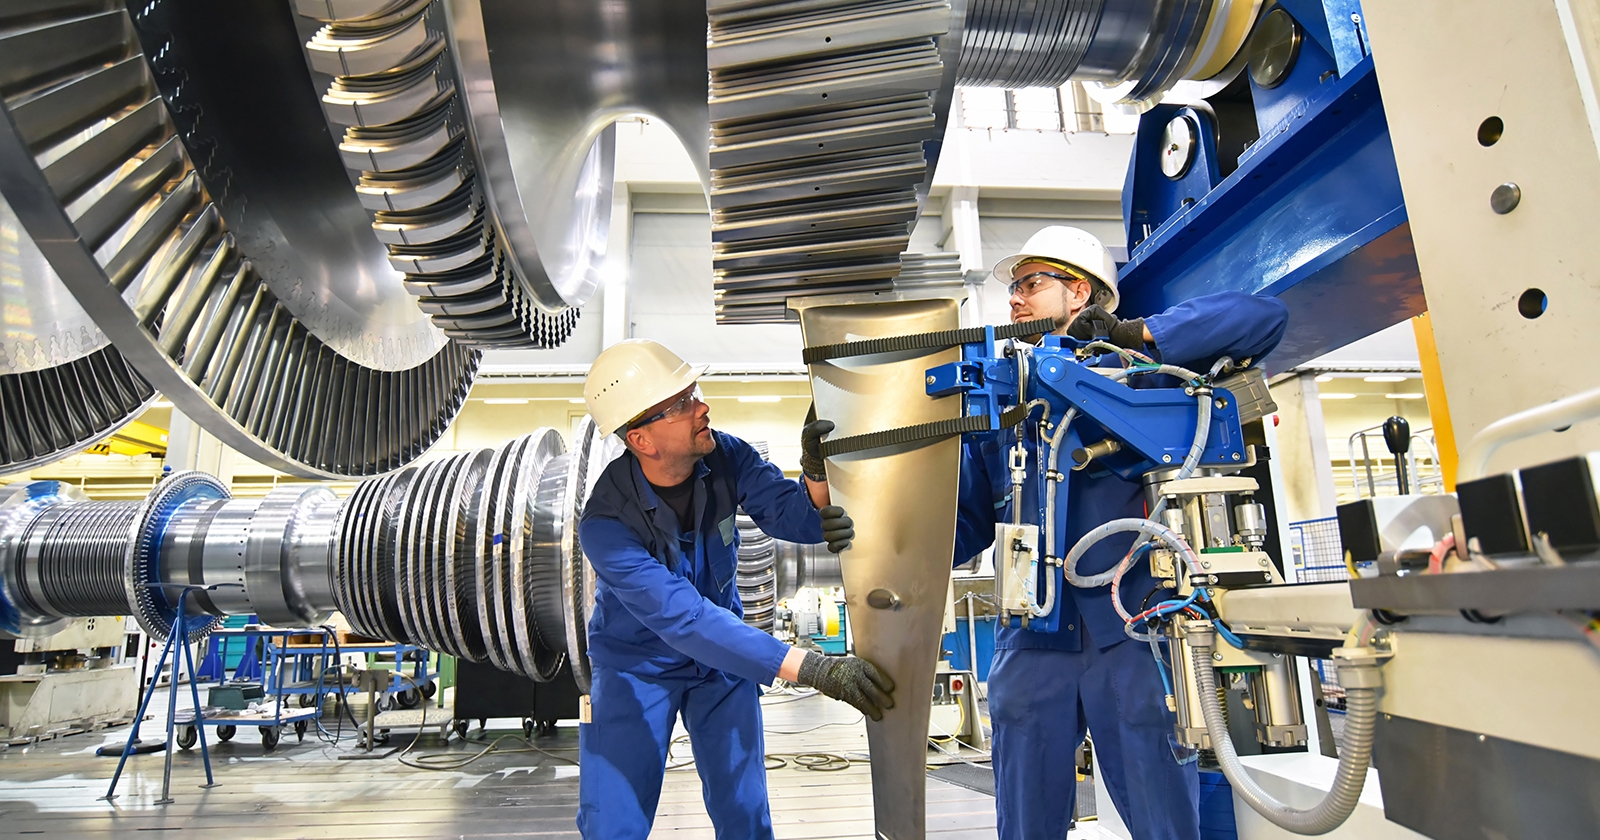 Two workers evaluate equipment on factory floor. Exponent conducts risk and safety analysis of mechanical engines. 